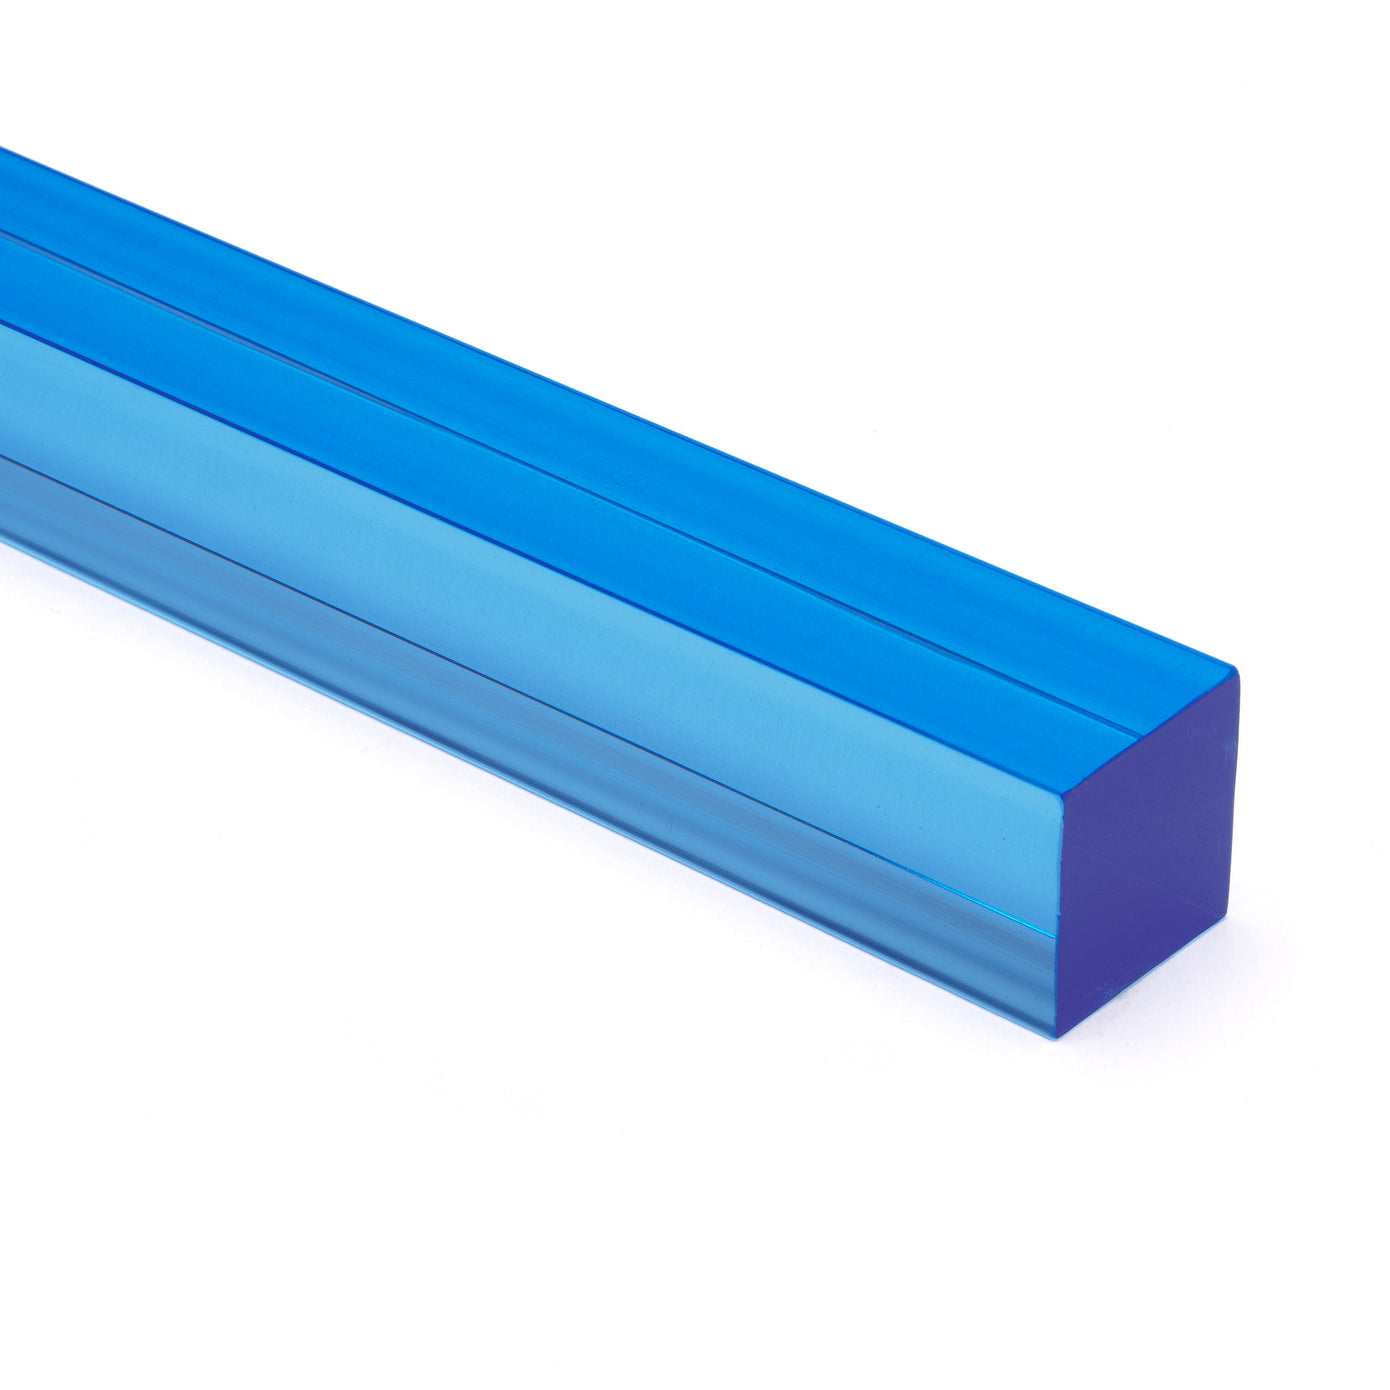 Acrylic Color, Rod, Blue 9092, Fluorescent, Extruded, Box of 4 Lengths, (1  in x 6 ft)